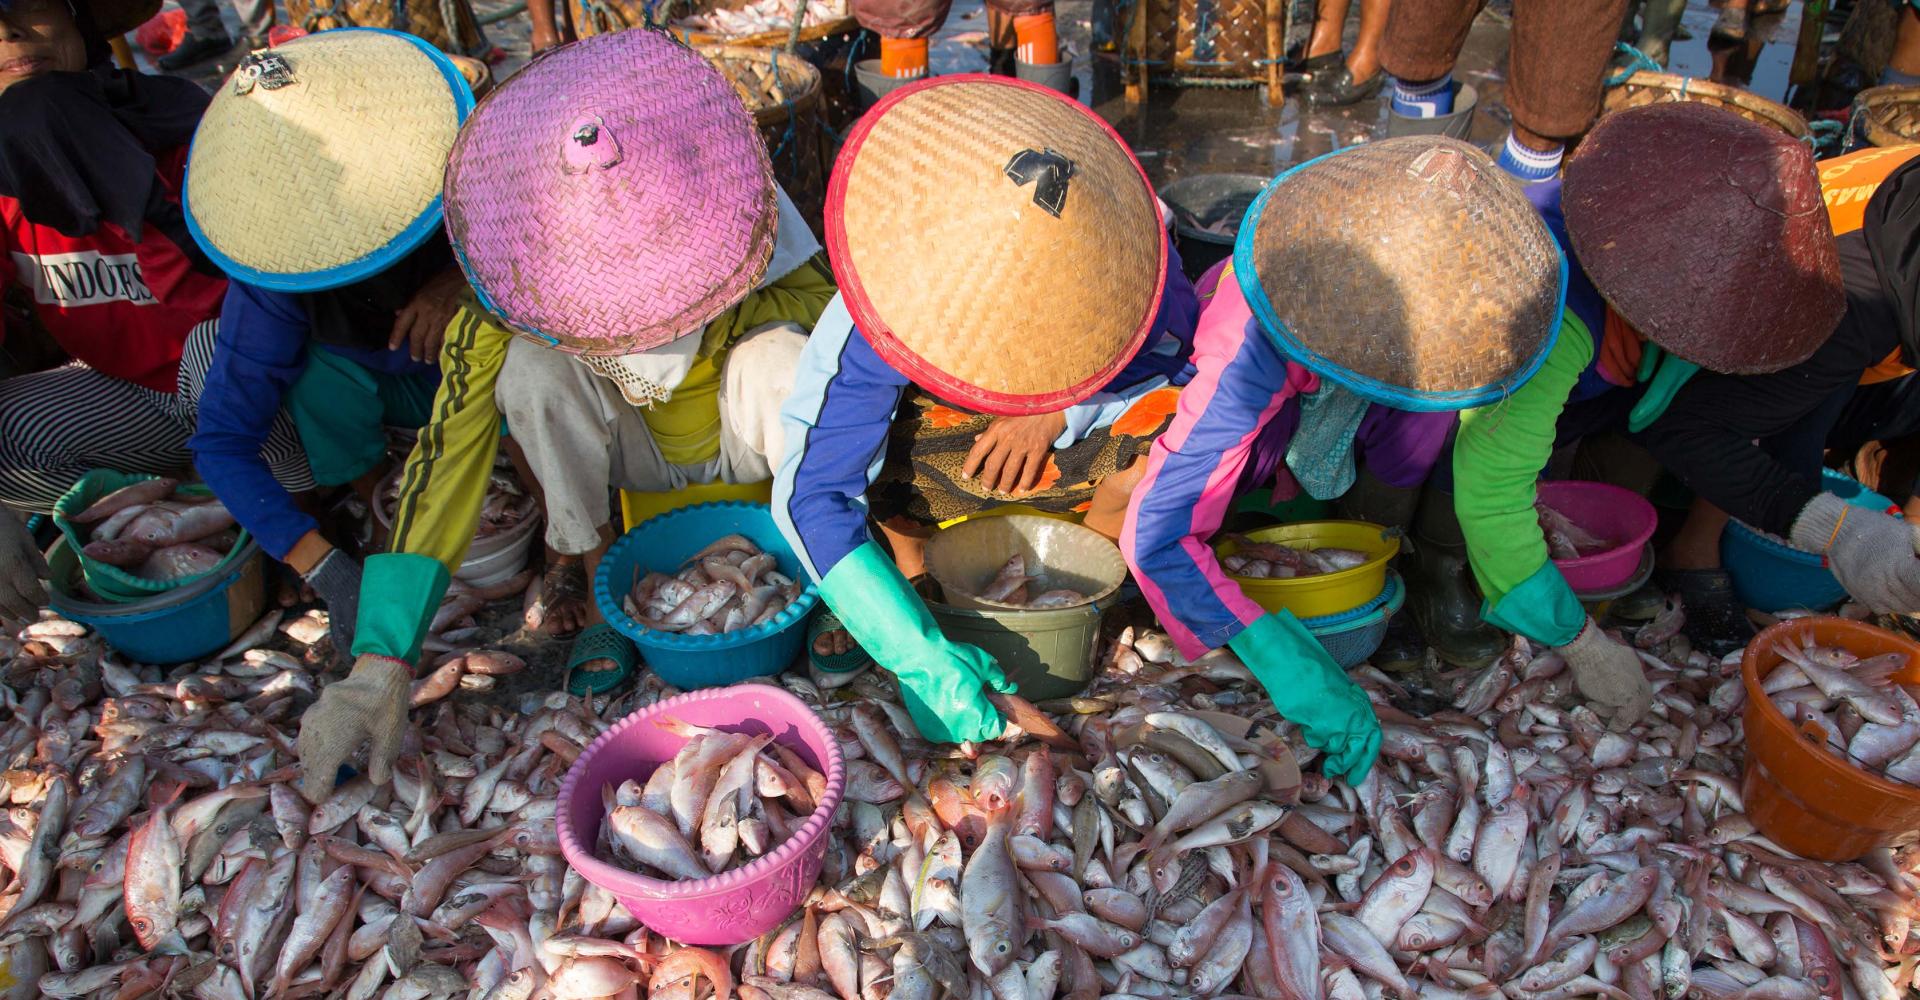 Five people with straw hats are squatting down to sort caught fish in seafood market in Asia